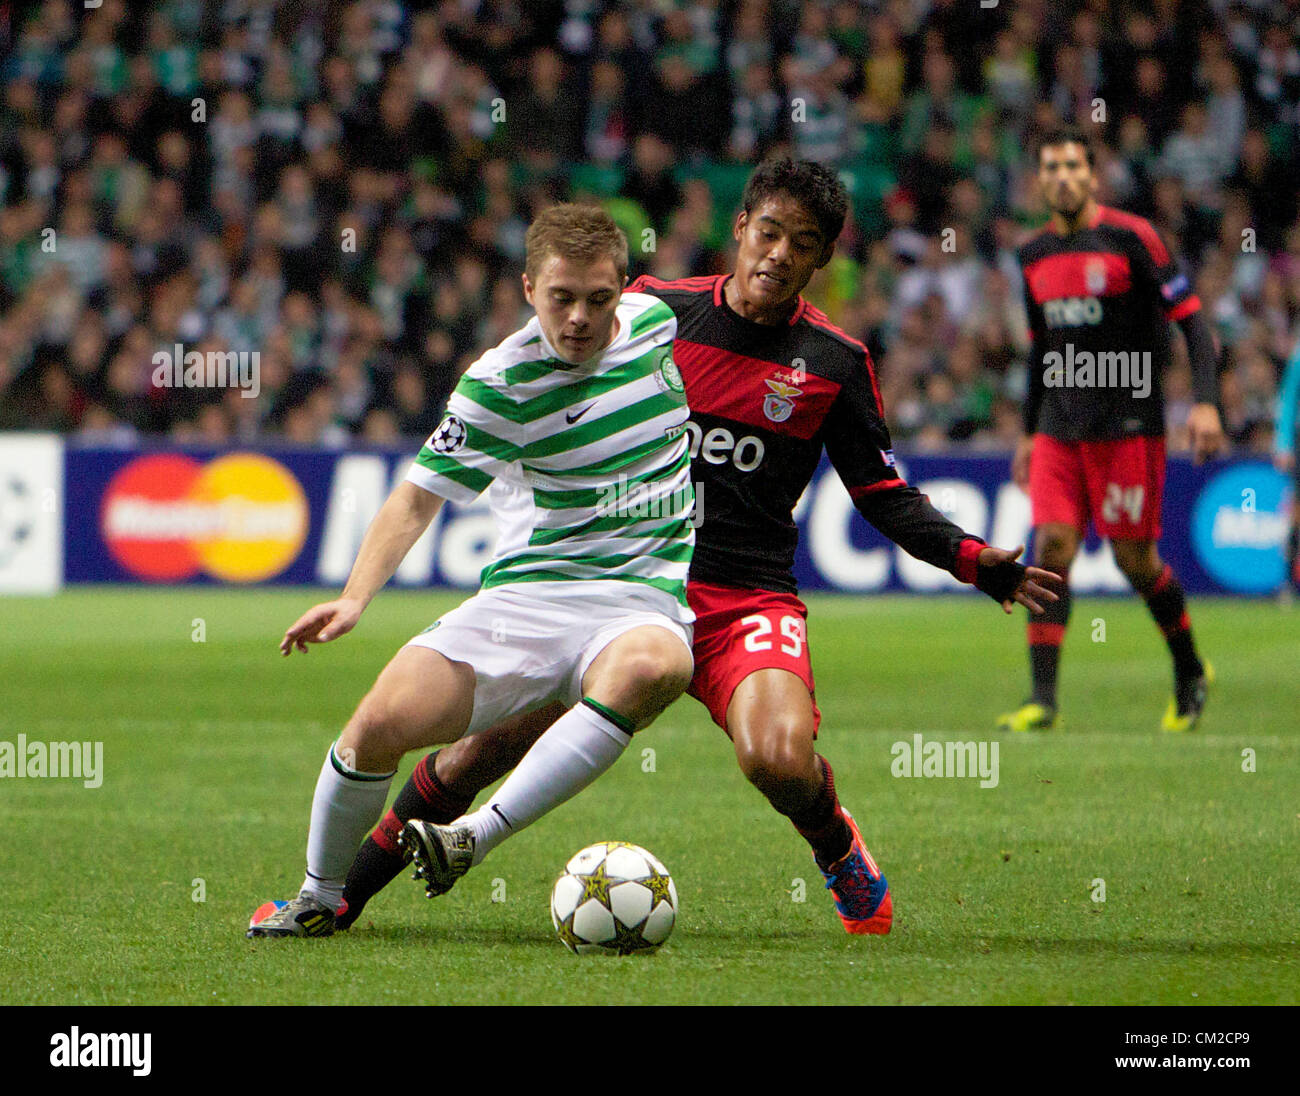 UEFA Champions League Football - Season 2012-13 Group G. Celtic FC v  Benfica FC. Celtic's James Forrest with Benfica's Melgarejo in action  during The UEFA Champions League Group G match between Celtic